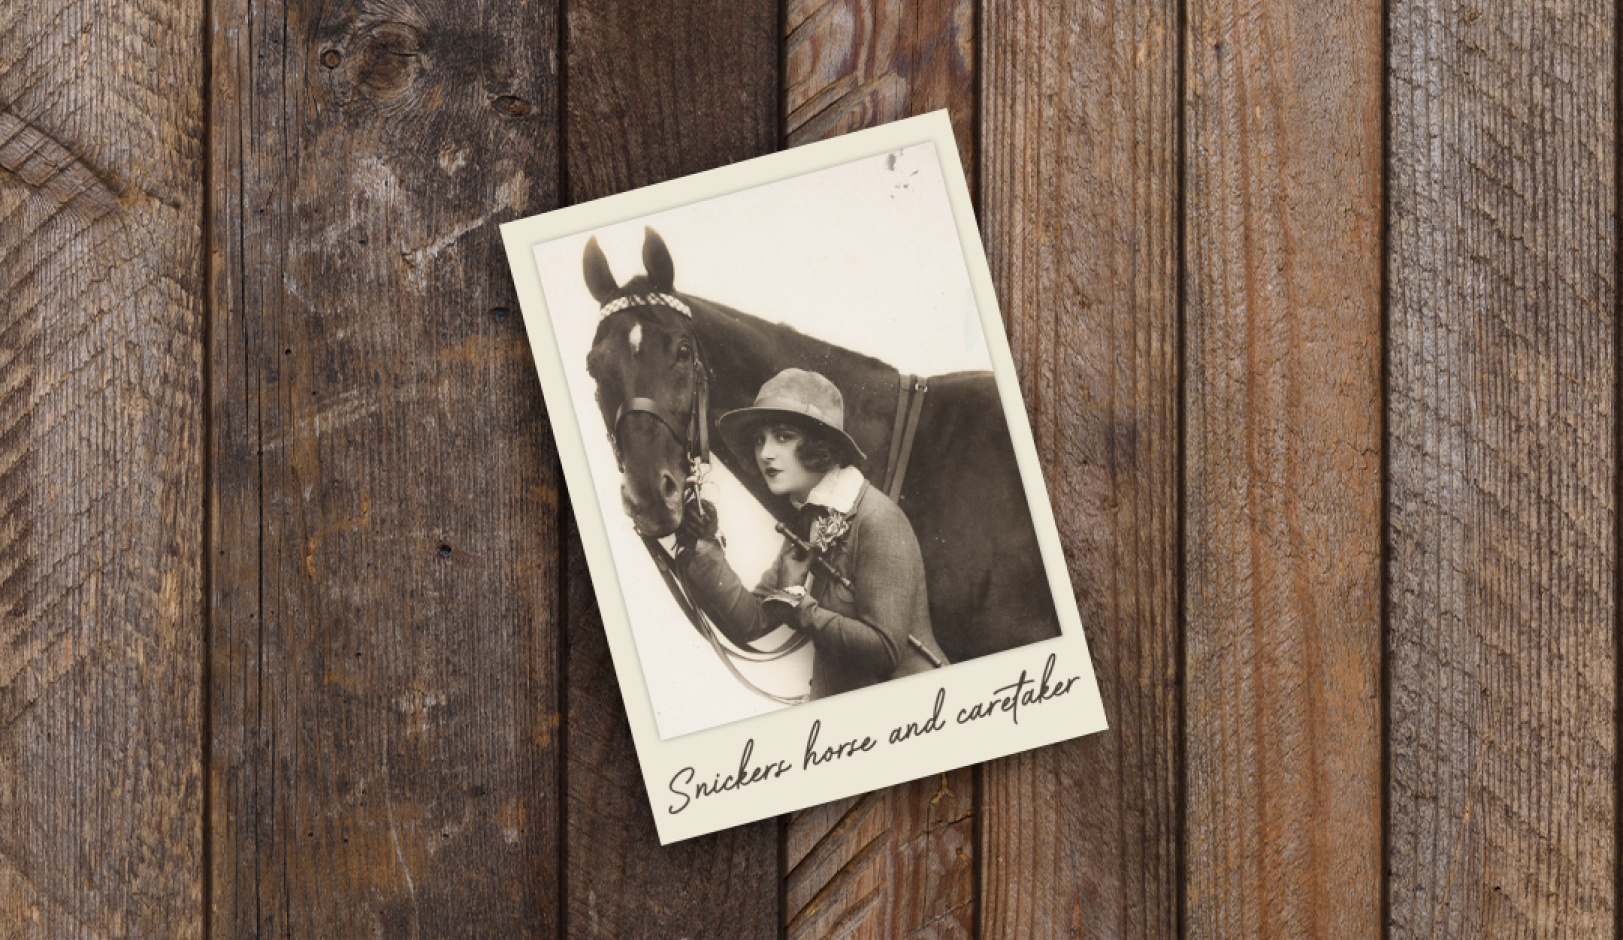 Black and white polaroid image of woman and horse labeled, "Snickers horse and caretaker"